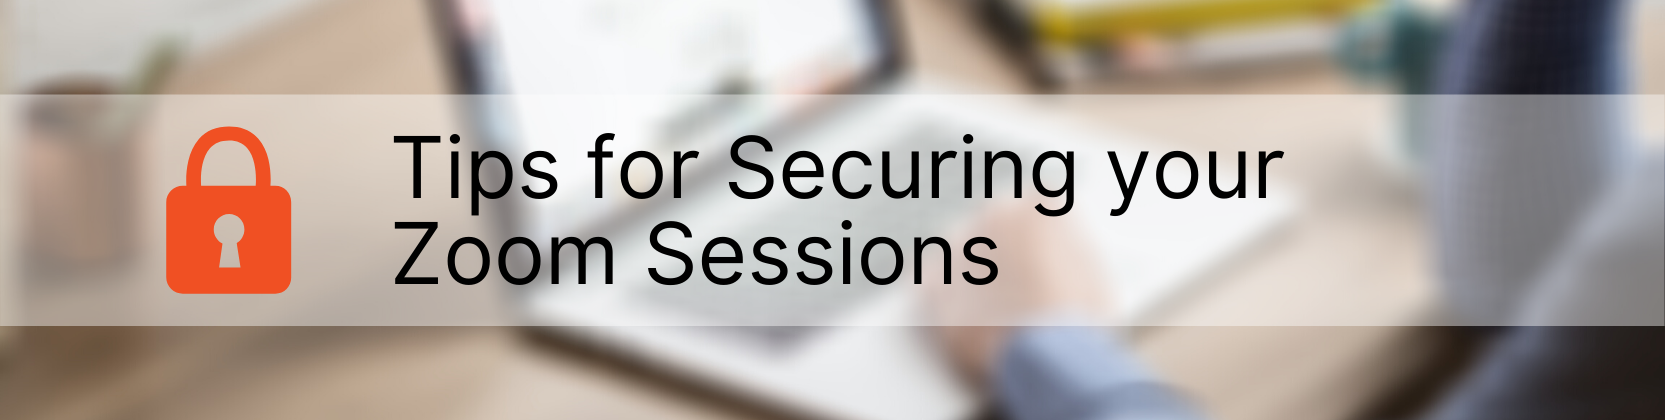 Tips for Securing your Zoom Sessions Page Banner 